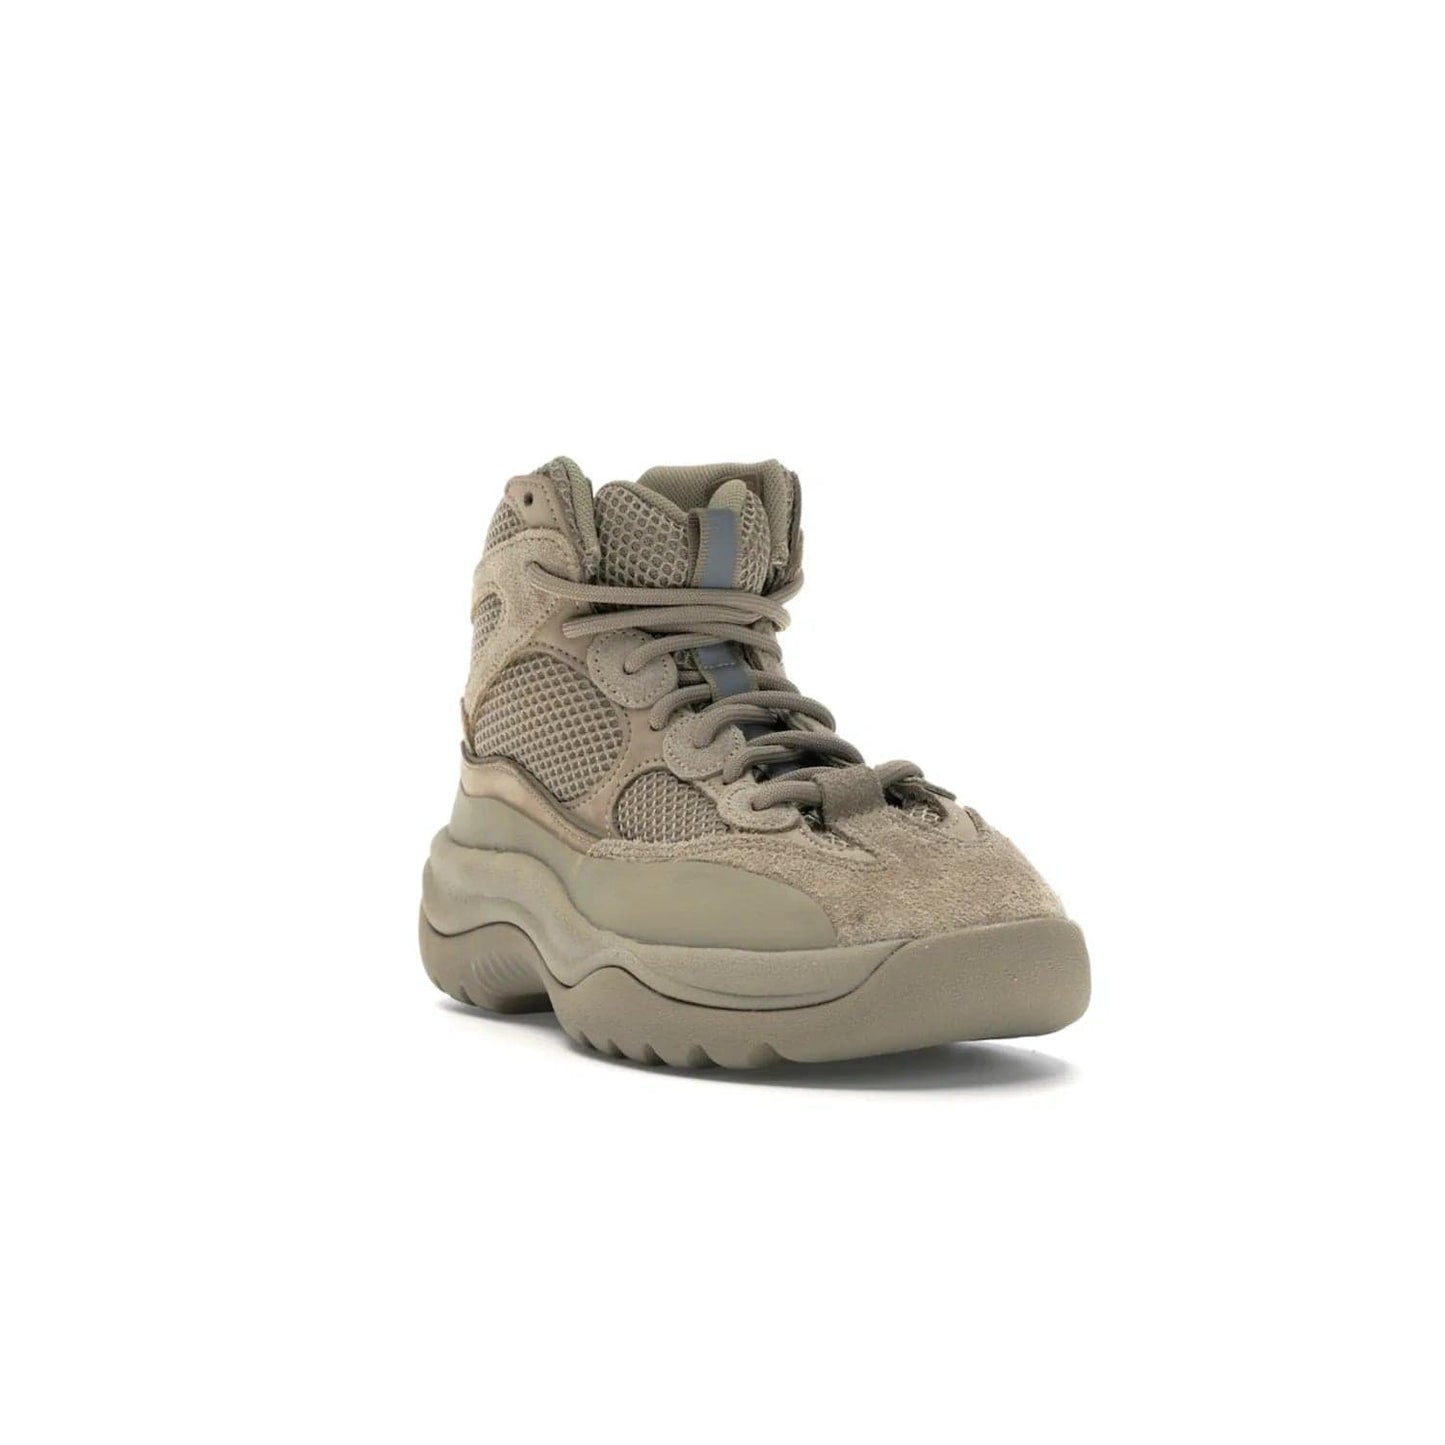 adidas Yeezy Desert Boot Rock - Image 7 - Only at www.BallersClubKickz.com - #
This season, make a fashion statement with the adidas Yeezy Desert Boot Rock. Nubuck and suede upper offers tonal style while the grooved sole provides traction and stability. Get yours in April 2019.